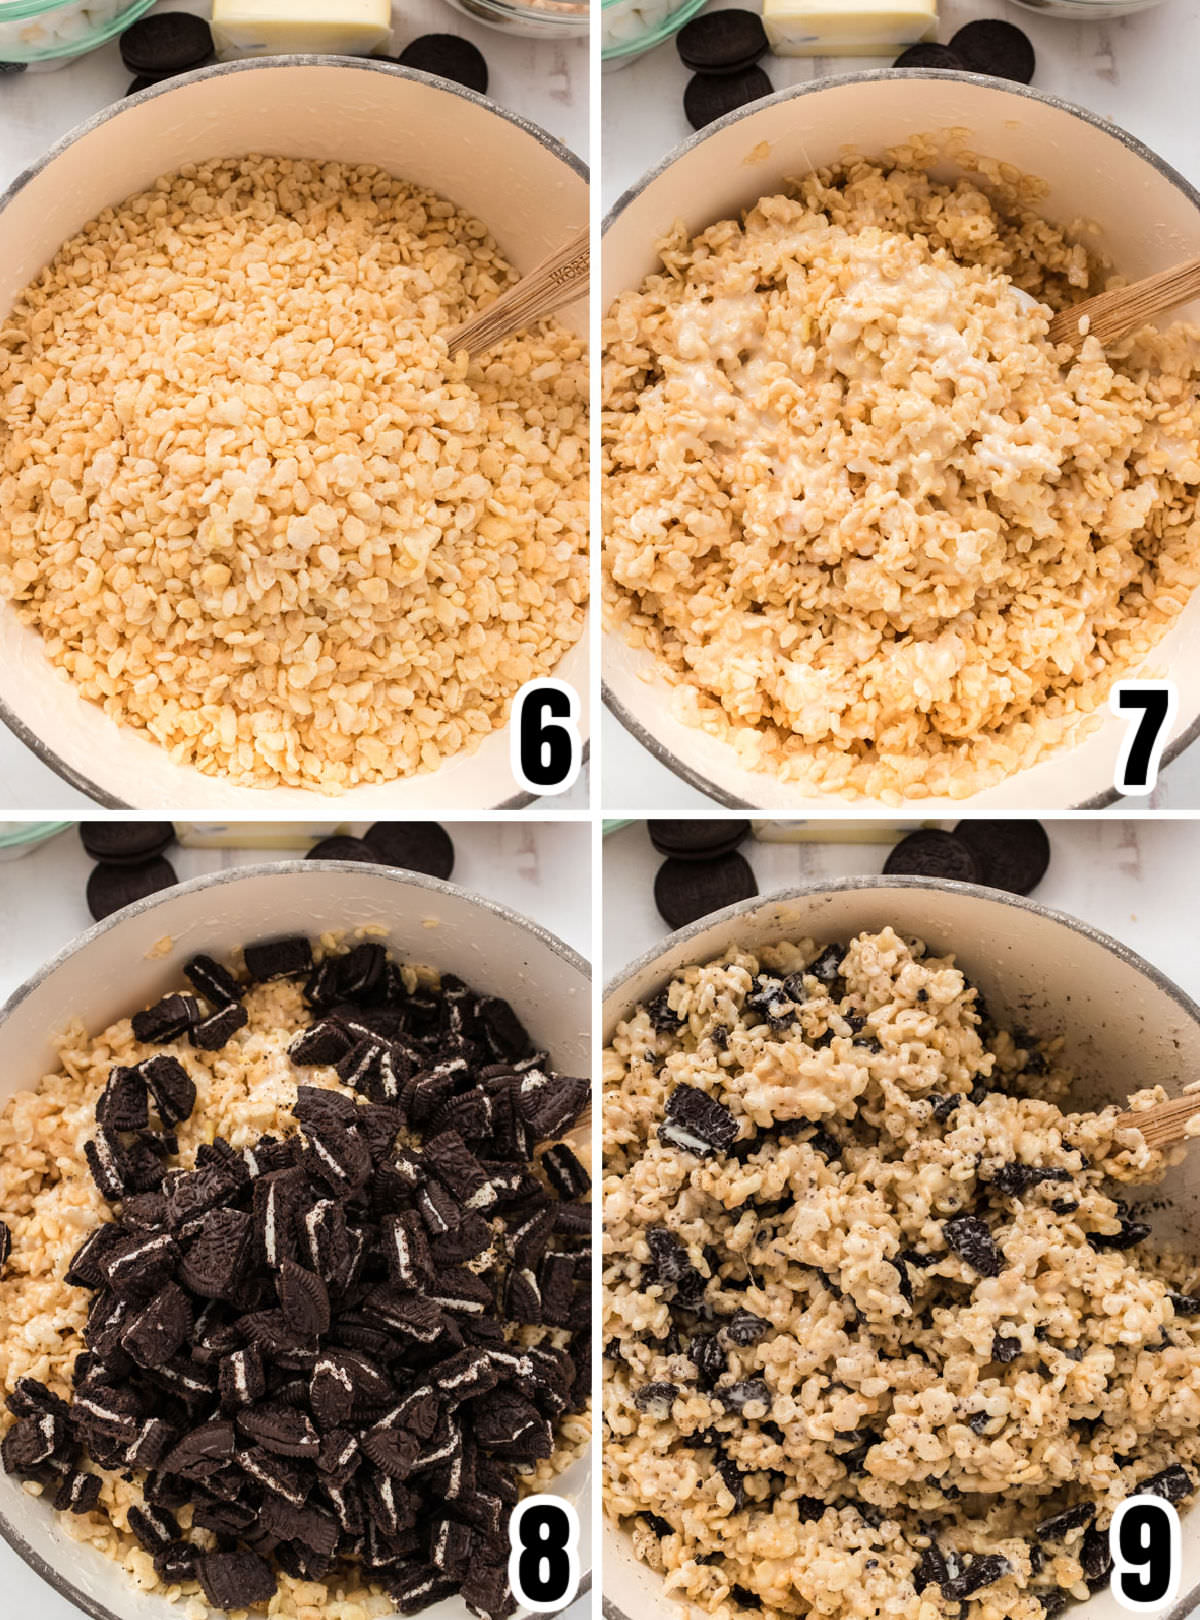 Collage image showing the steps for adding the Rice Krispie Cereal and the Oreo Cookies to the marshmallow mixture.